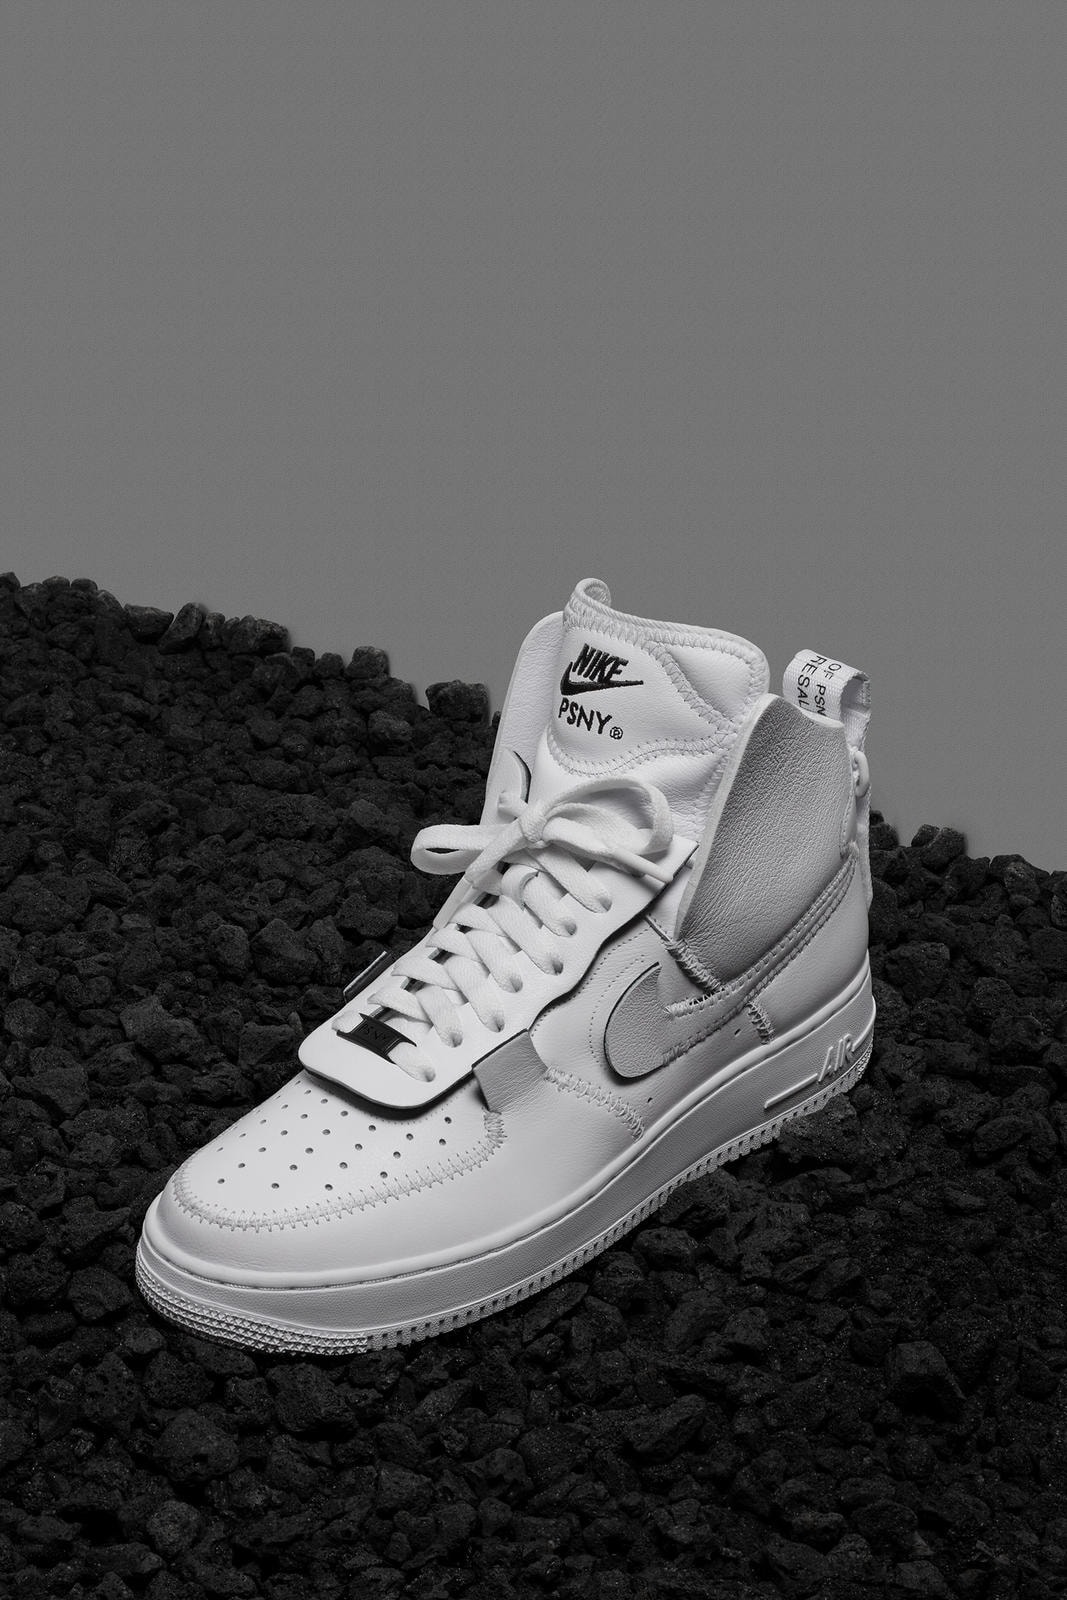 PSNY x Nike Air Force 1 Fall/Winter Preview High Top White Black Grey Deconstructed